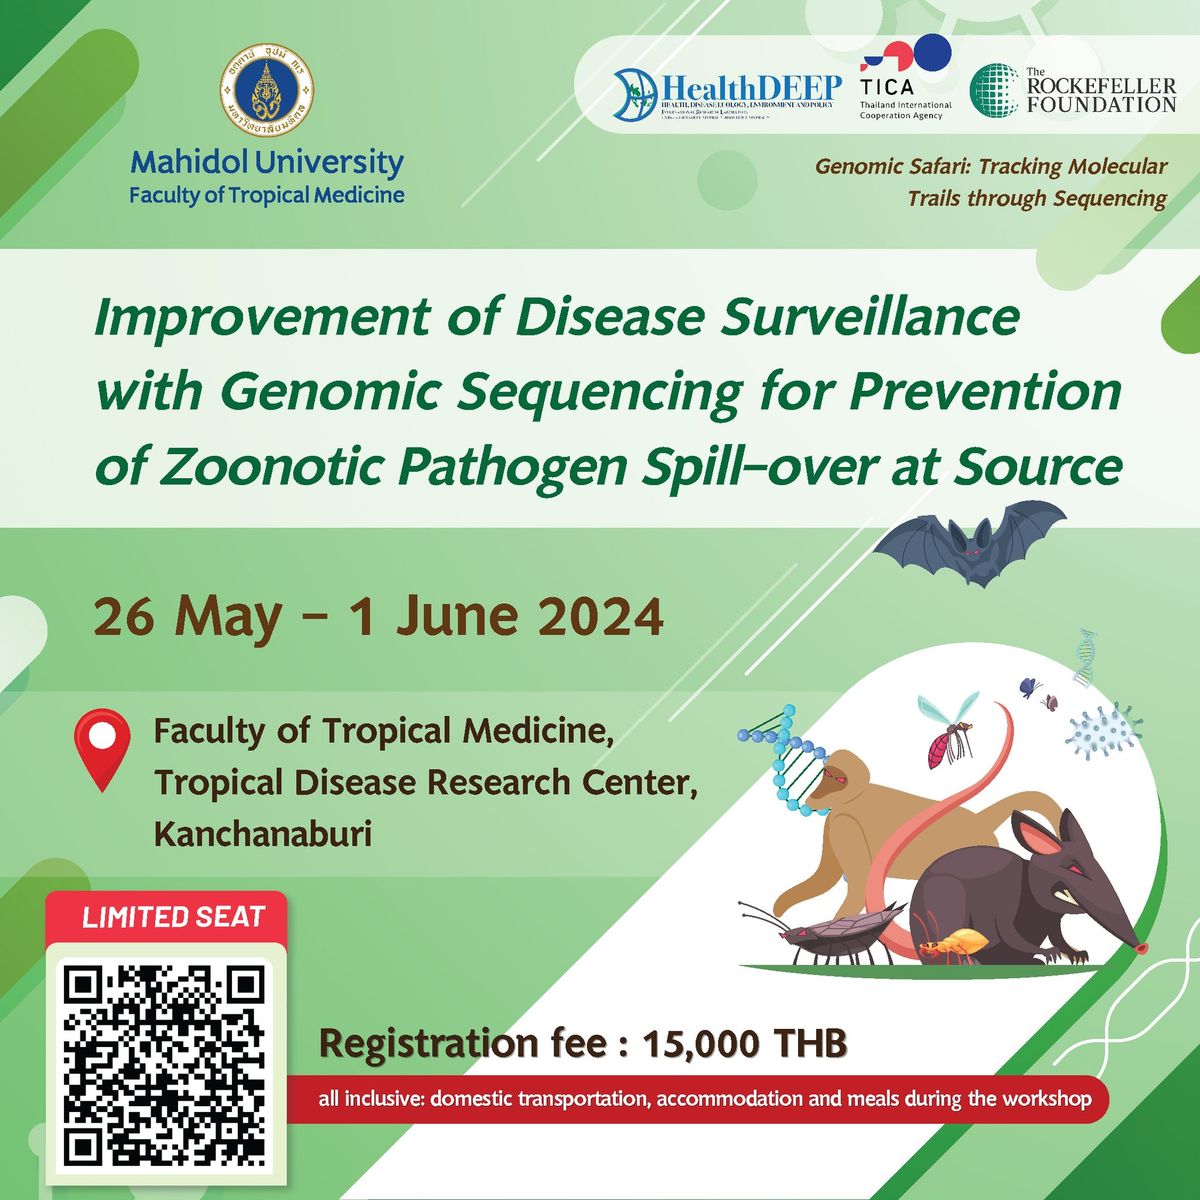 Improvement of Disease Surveillance with Genomic Sequencing